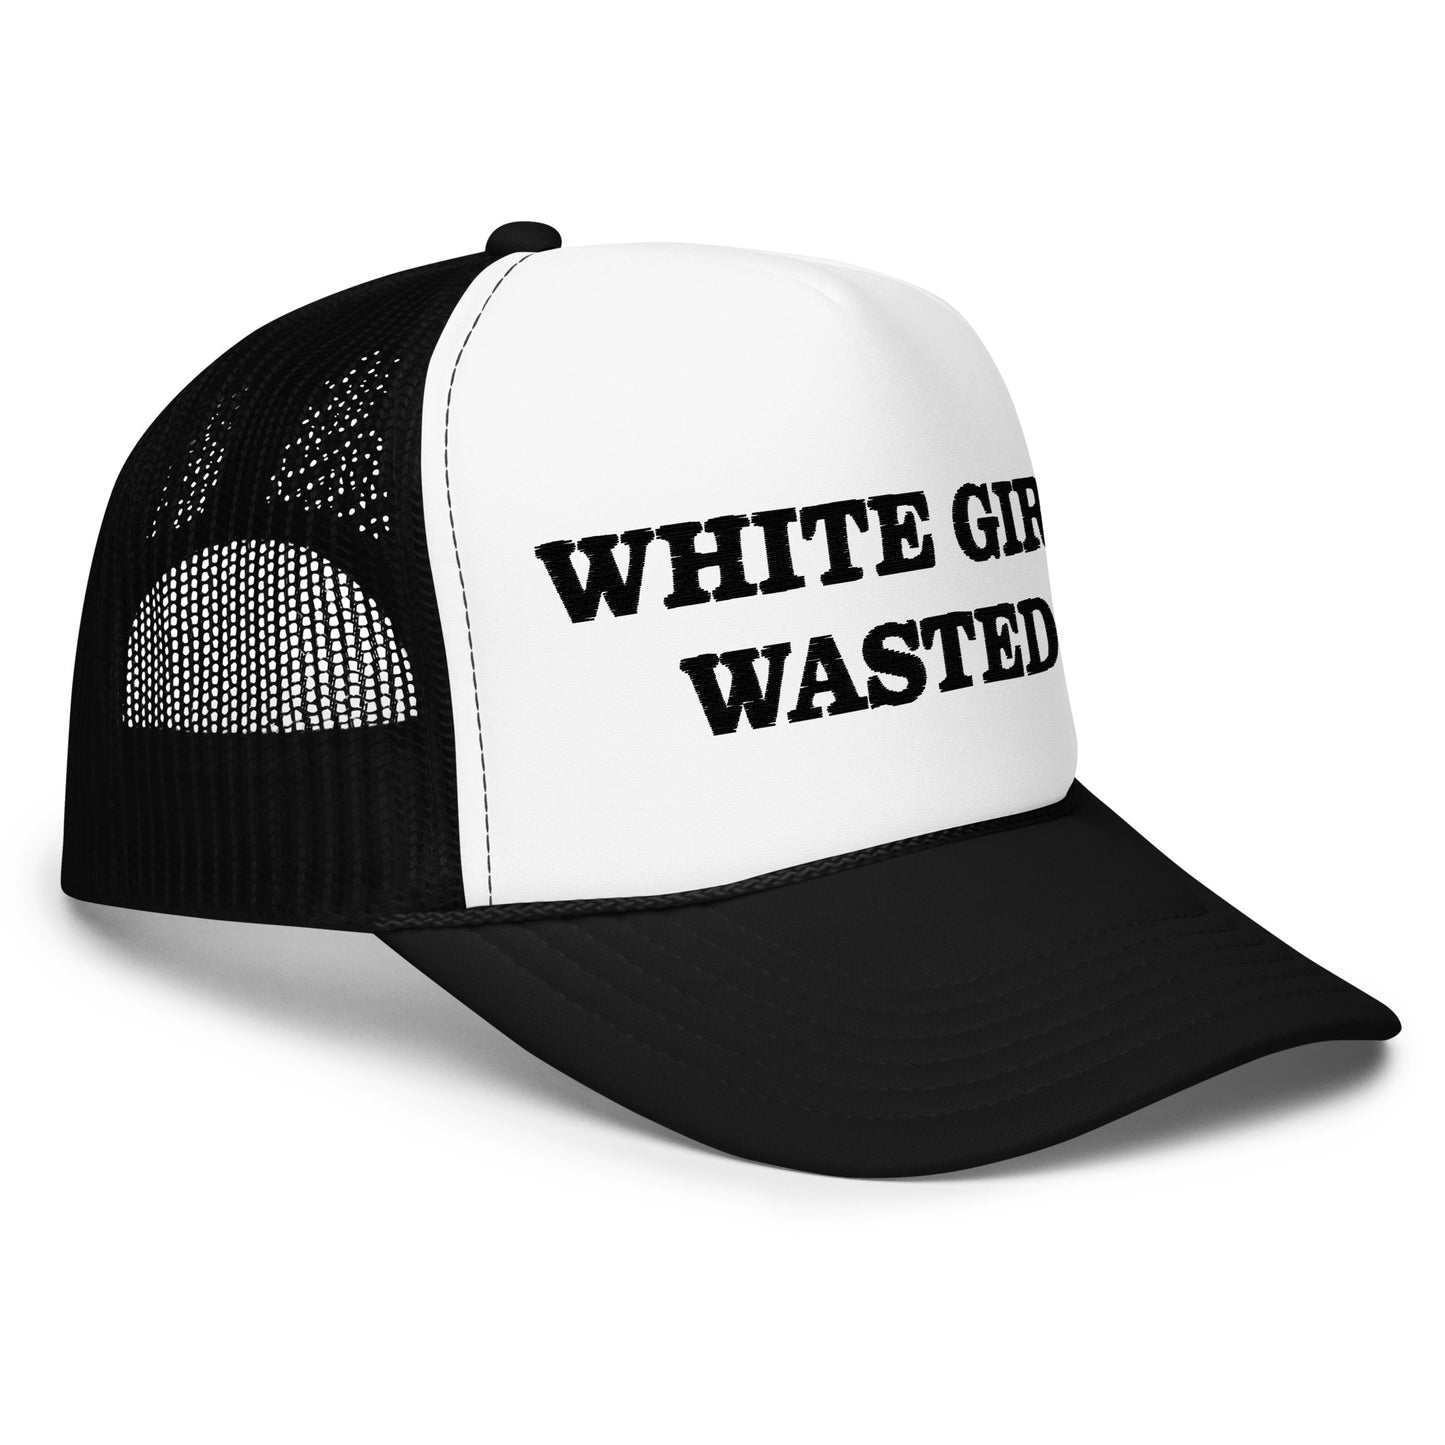 WHITE GIRL WASTED hat